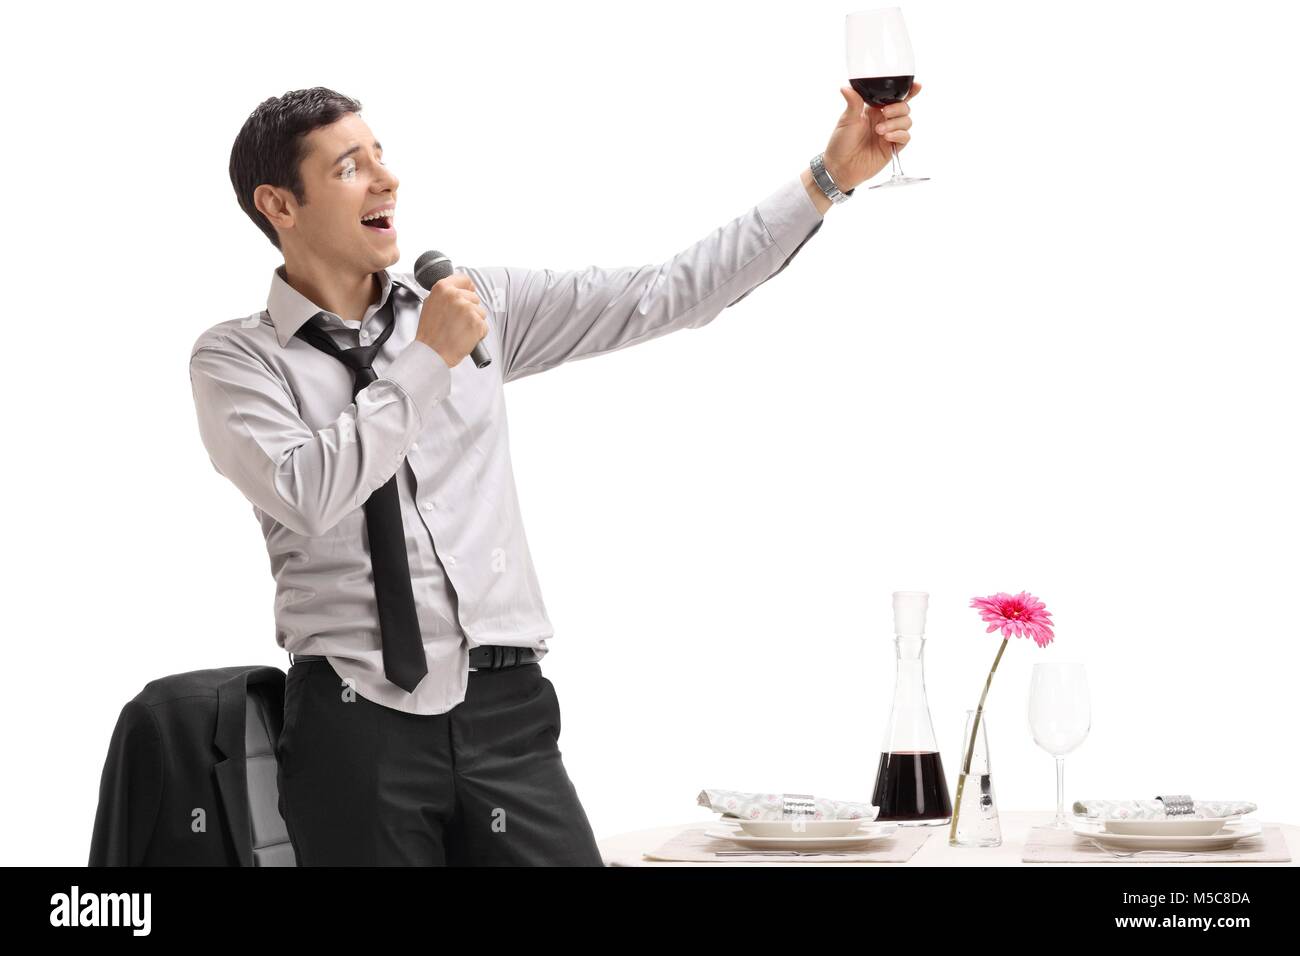 Drunk man holding a glass of wine and singing on a microphone isolated on white background Stock Photo